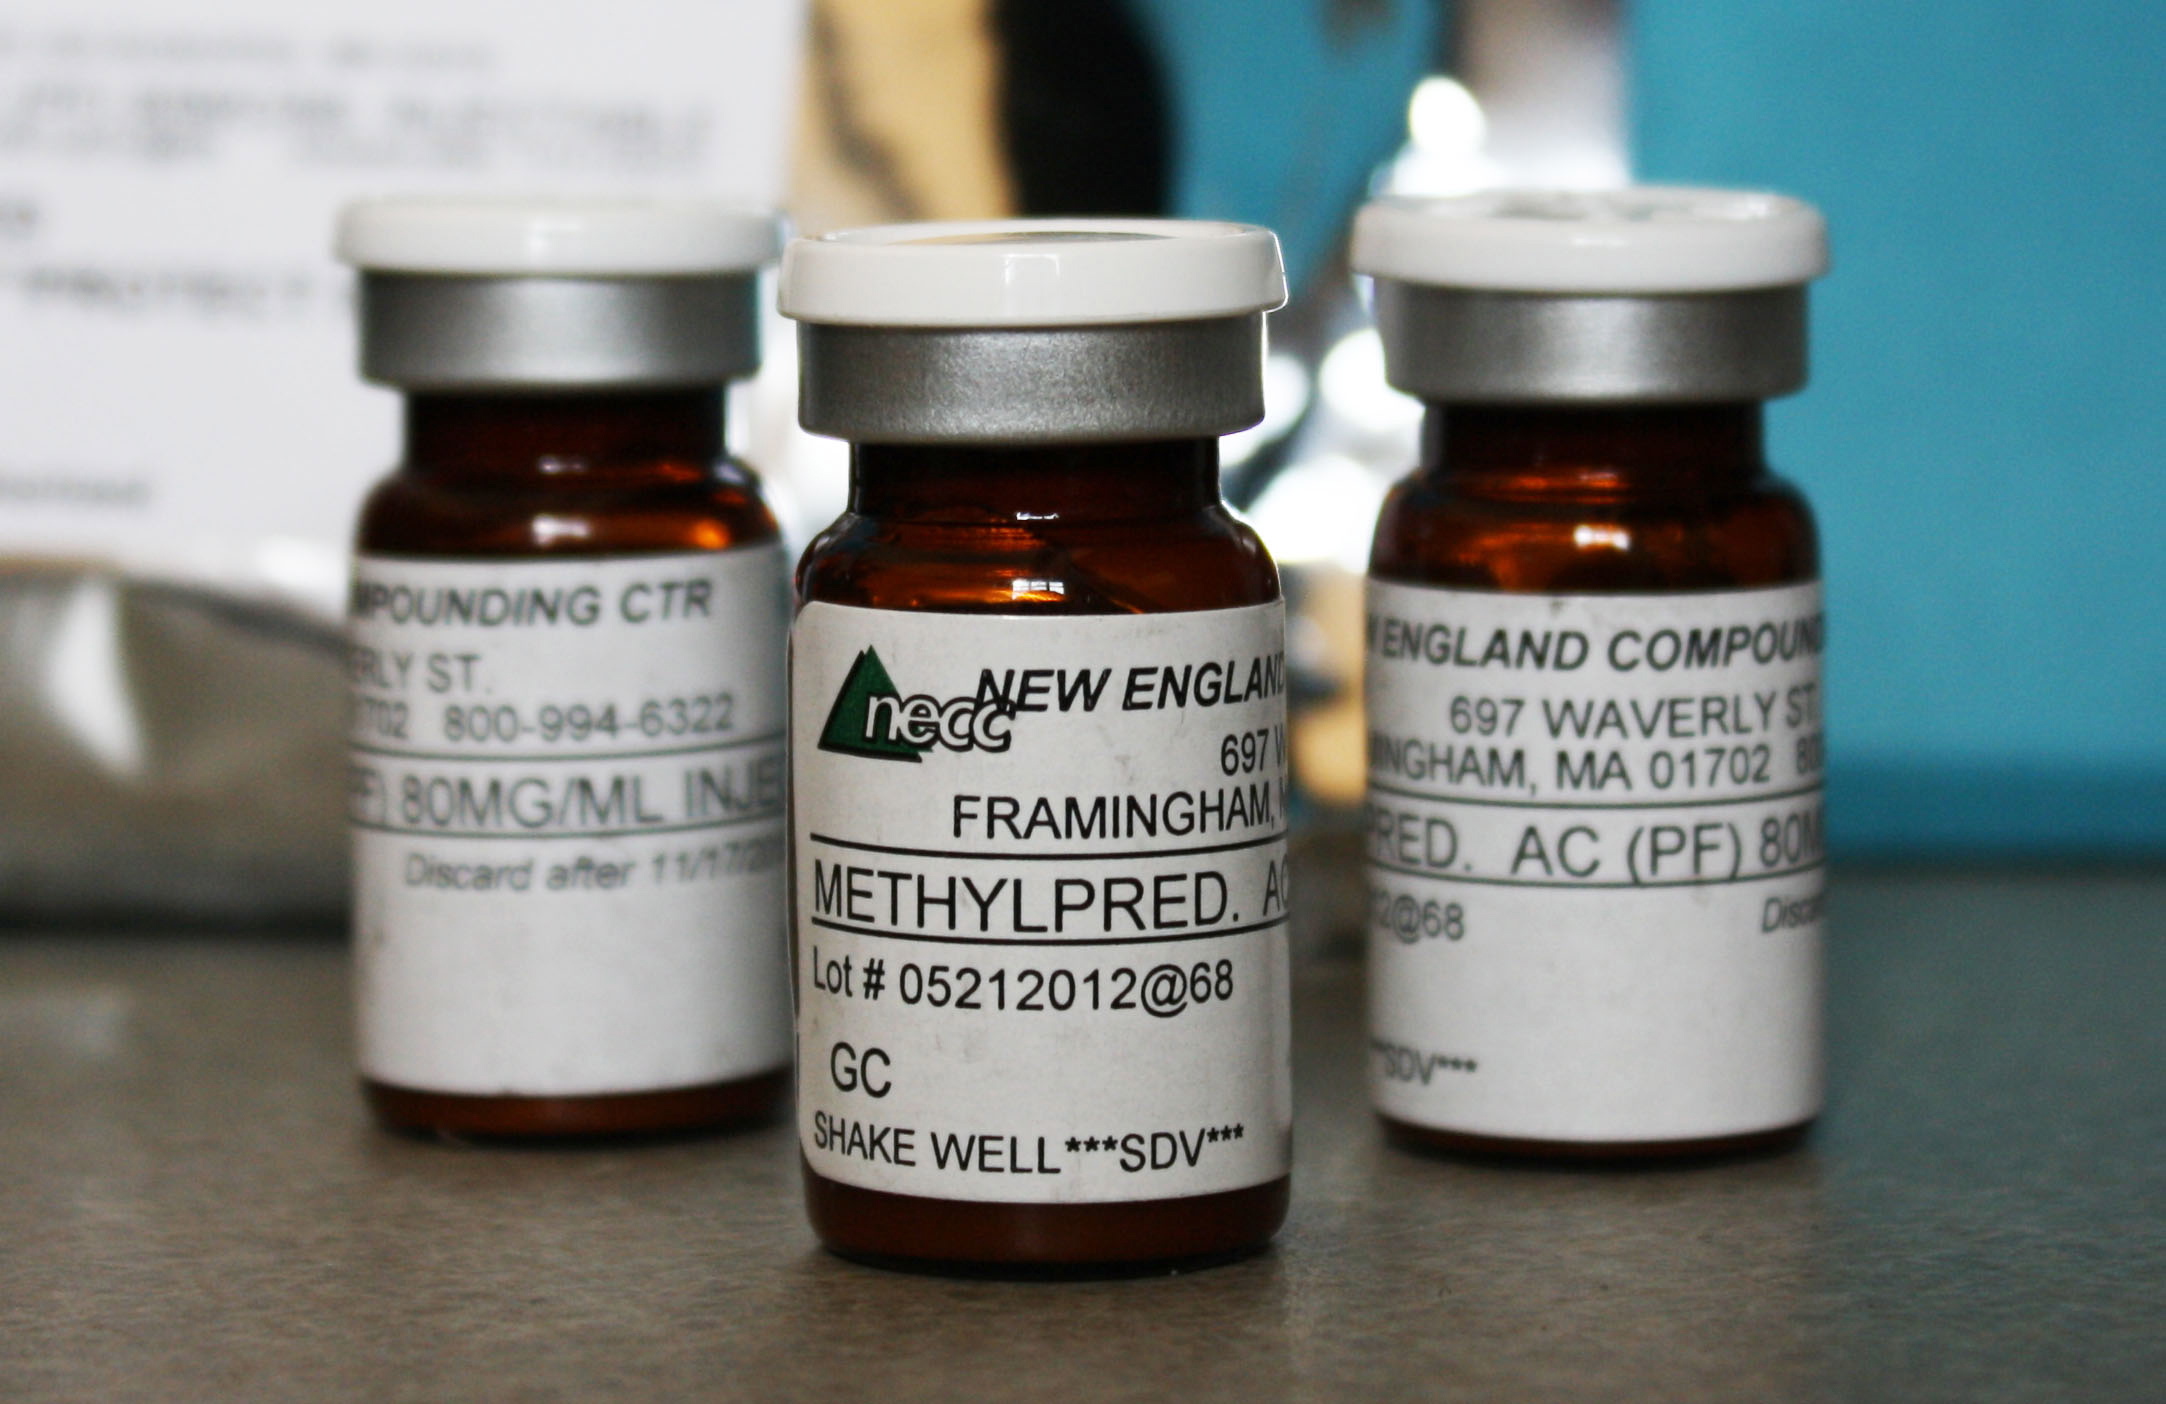 Minnesota Department of Health
Vials of an injectable steroid product made by New England Compounding Center have been implicated in a fungal meningitis outbreak.